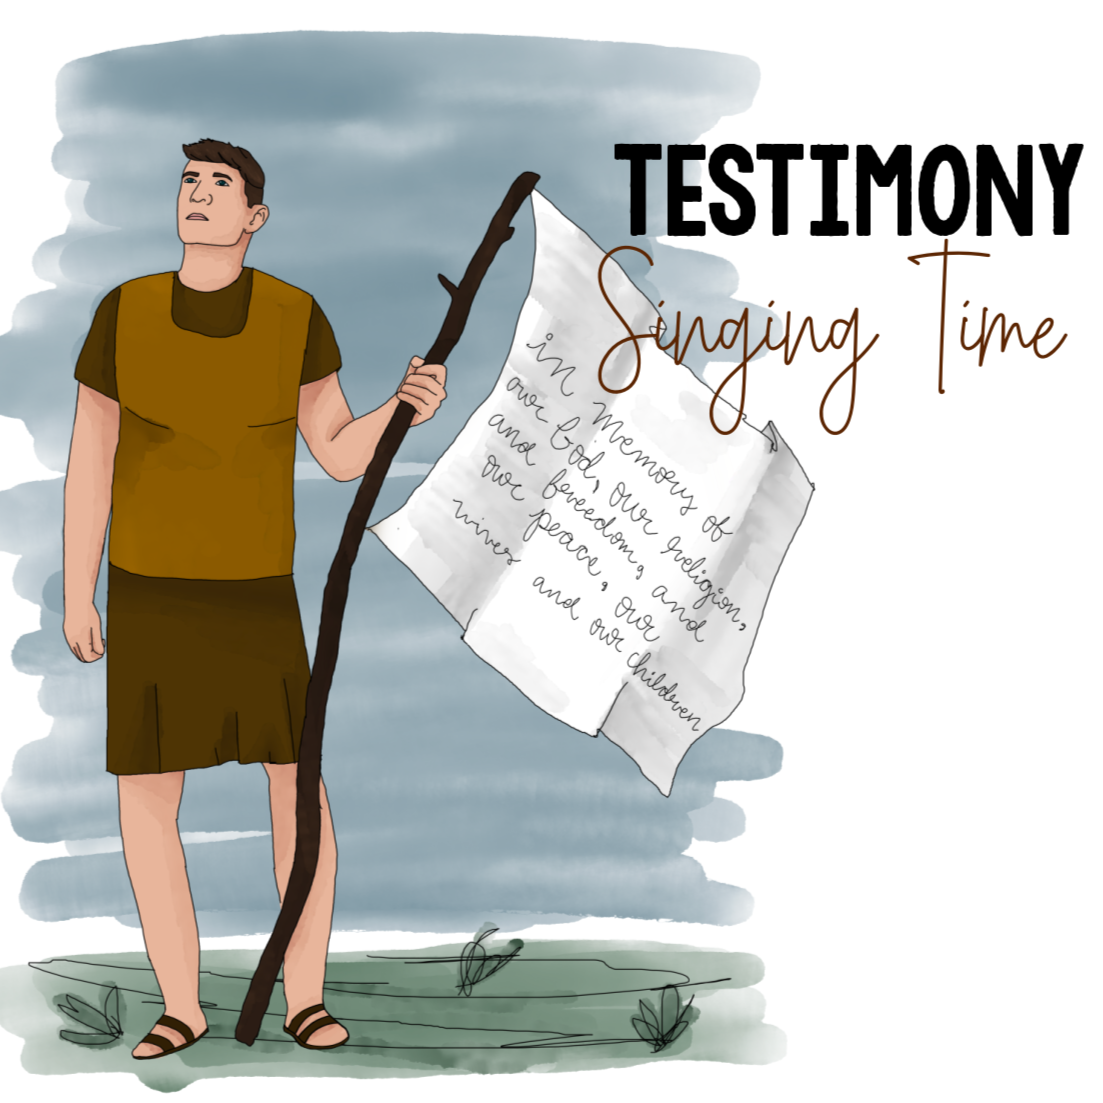 Teach Testimony song with these fun and engaging Singing Time Ideas for LDS Primary Music Leaders - a fun assortment of activities and lesson plans.